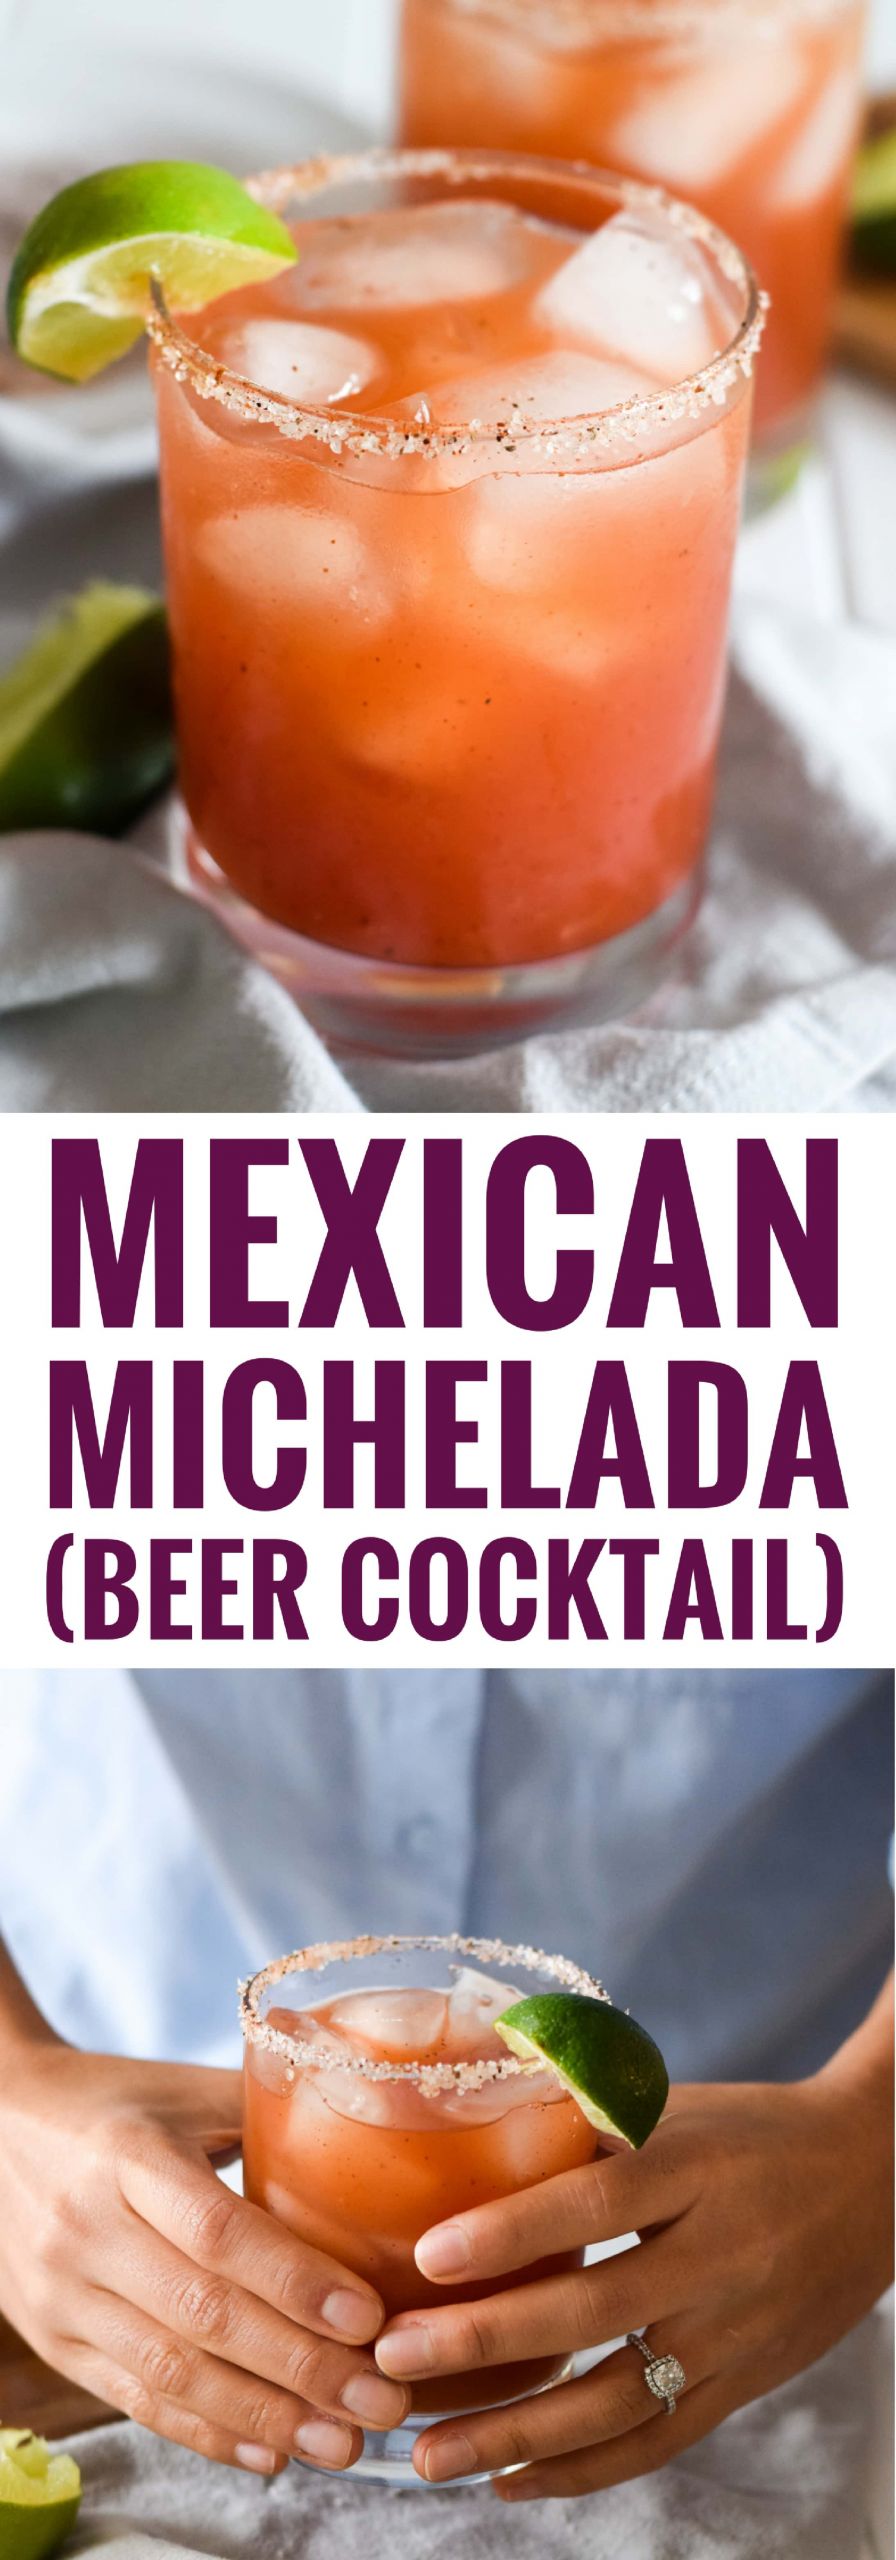 Mexican Beer Cocktails
 Mexican Michelada Beer Cocktail Isabel Eats